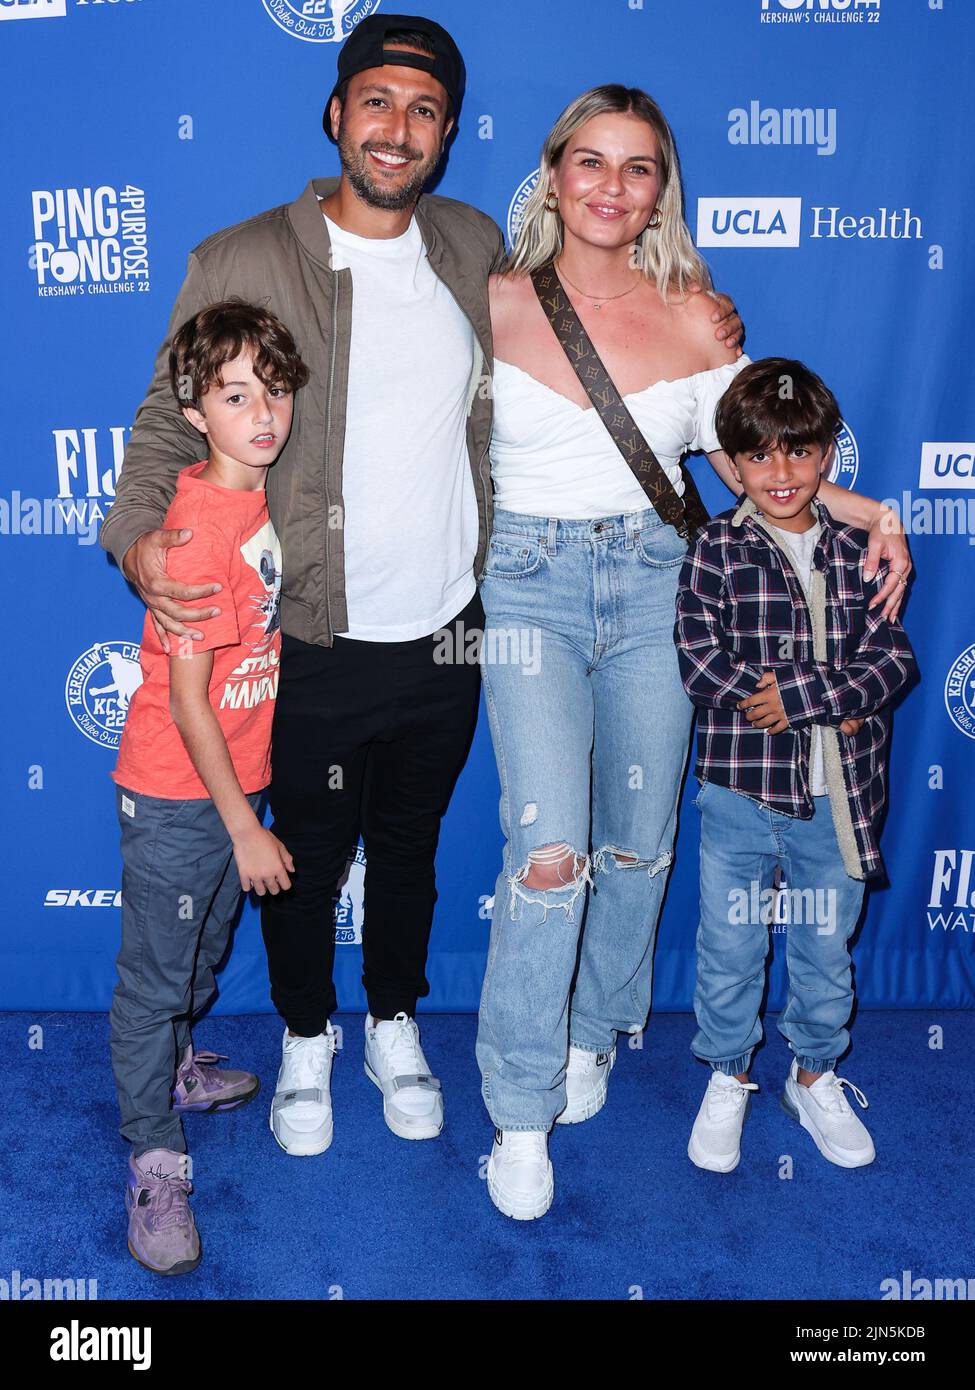 ELYSIAN PARK, LOS ANGELES, CALIFORNIA, USA - AUGUST 08: Roby Yadegar and Tanya Rad arrive at Kershaw's Challenge Ping Pong 4 Purpose 2022 held at Dodger Stadium on August 8, 2022 in Elysian Park, Los Angeles, California, United States. (Photo by Xavier Collin/Image Press Agency) Stock Photo